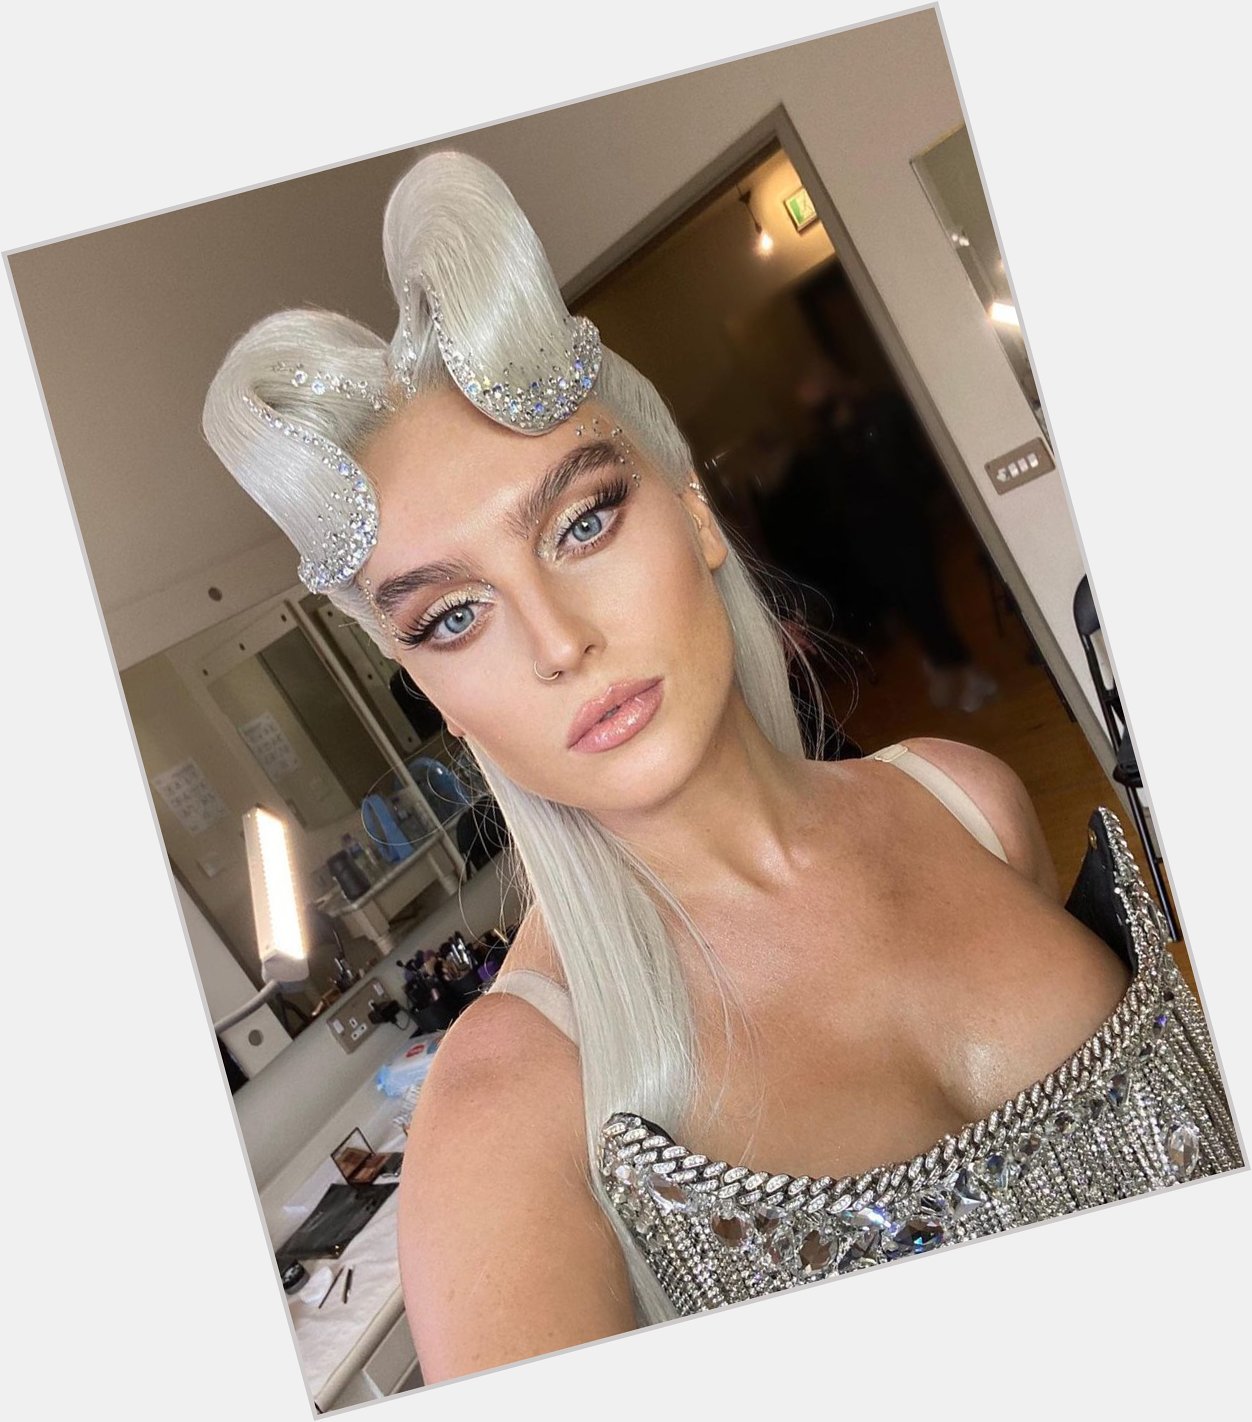 Wishing a happy 30th birthday to the absolutely phenomenal Perrie Edwards! 